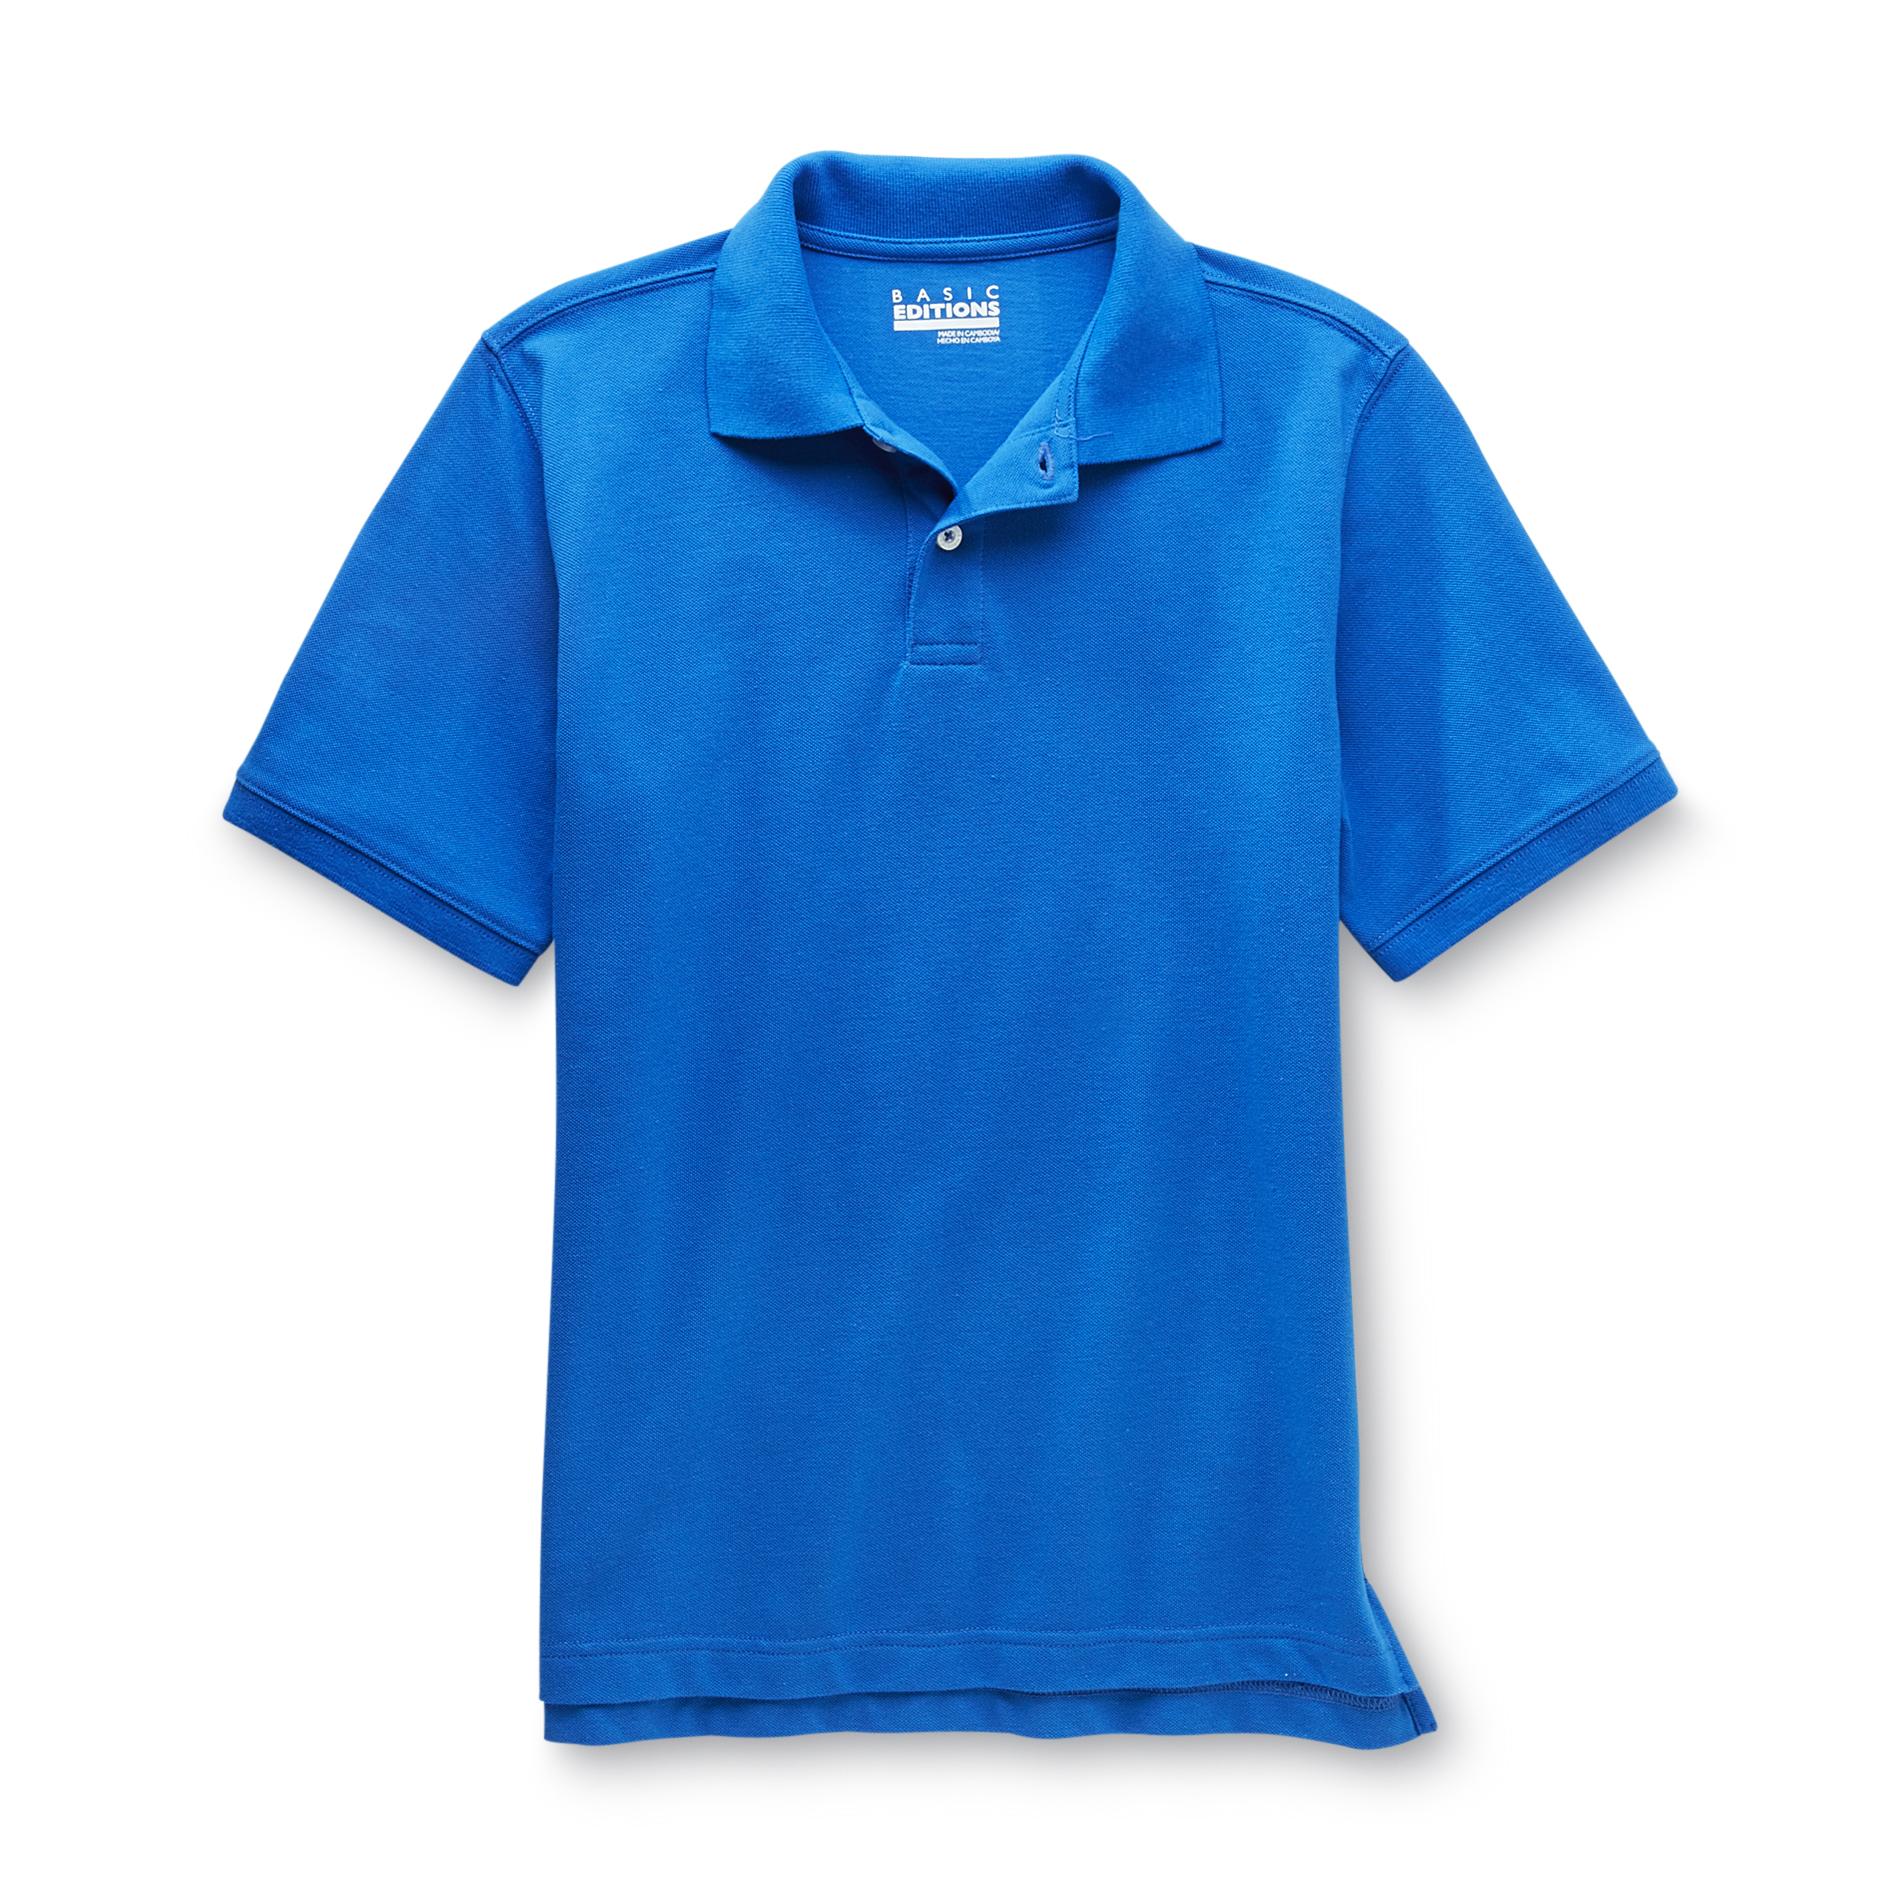 Basic Editions Boy's Polo Shirt - Solid